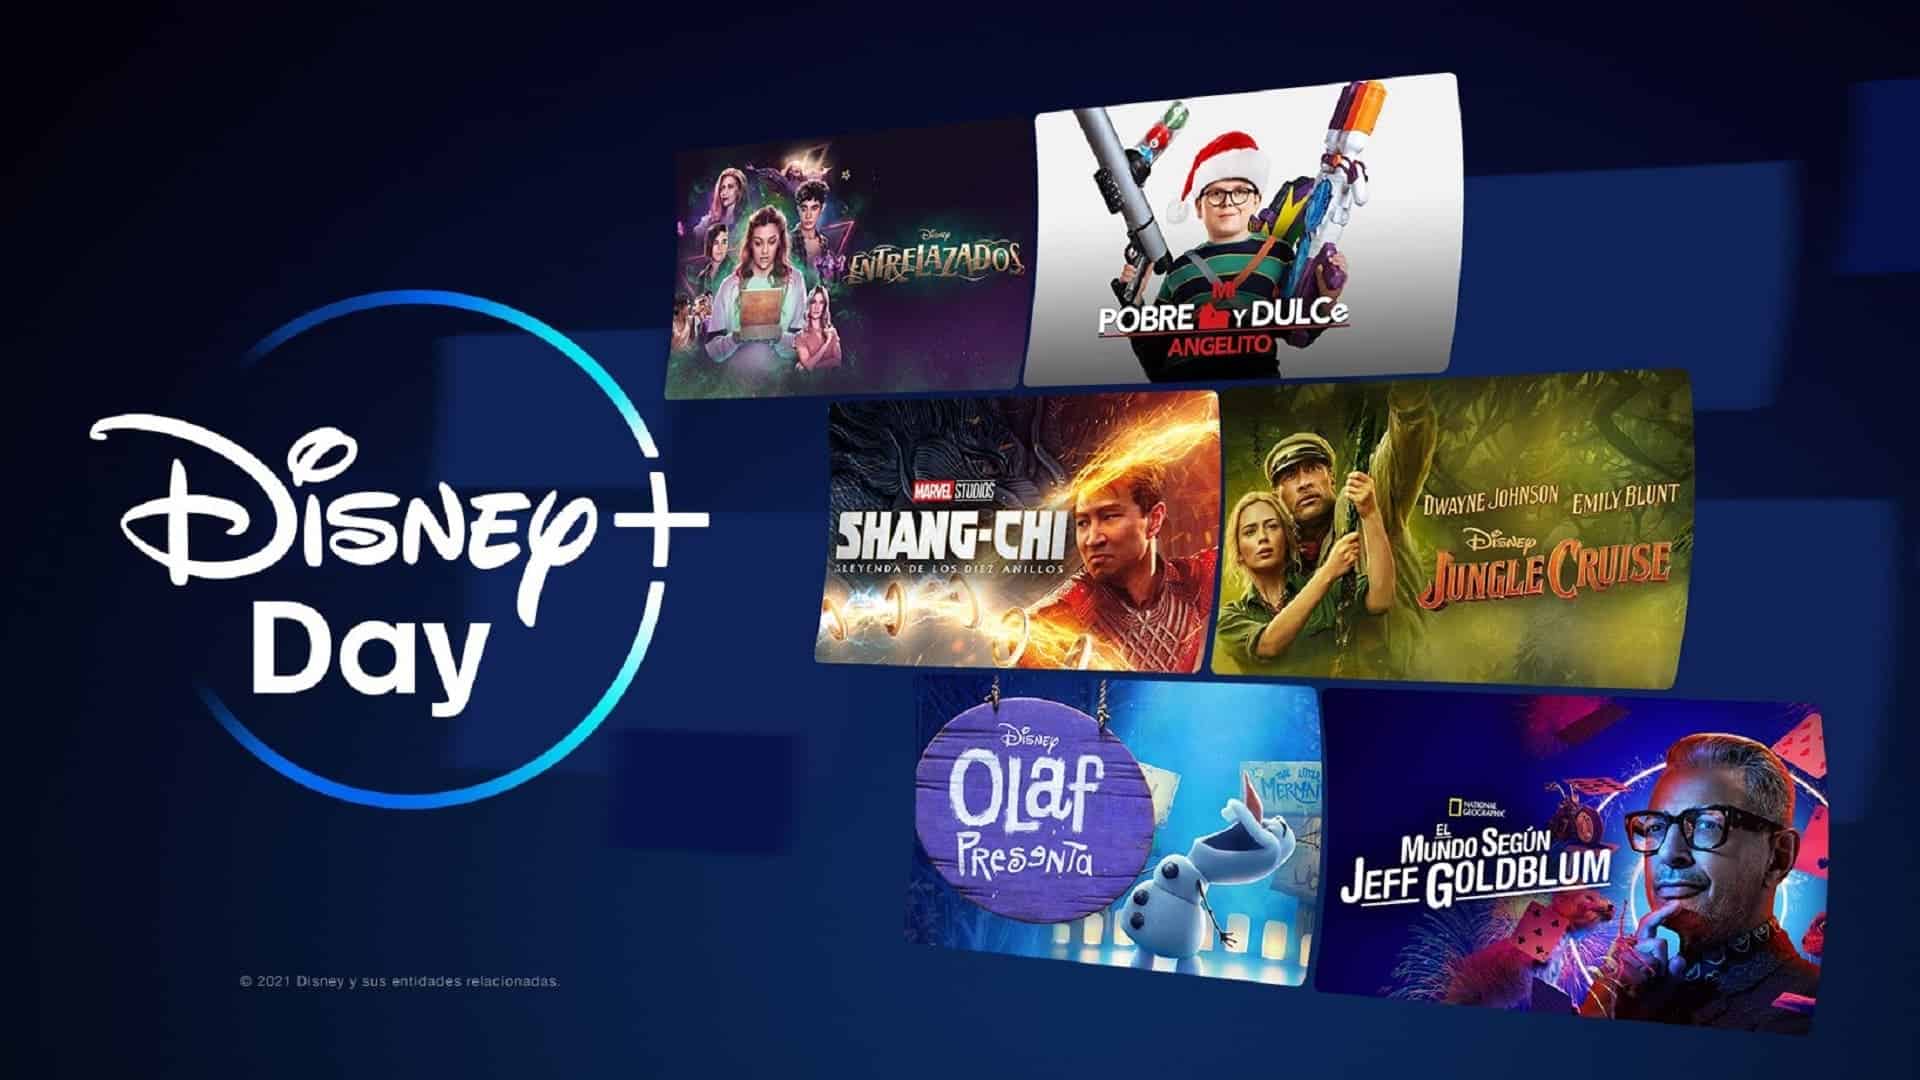 Opinion: Disney+ pricing with ads is disappointing